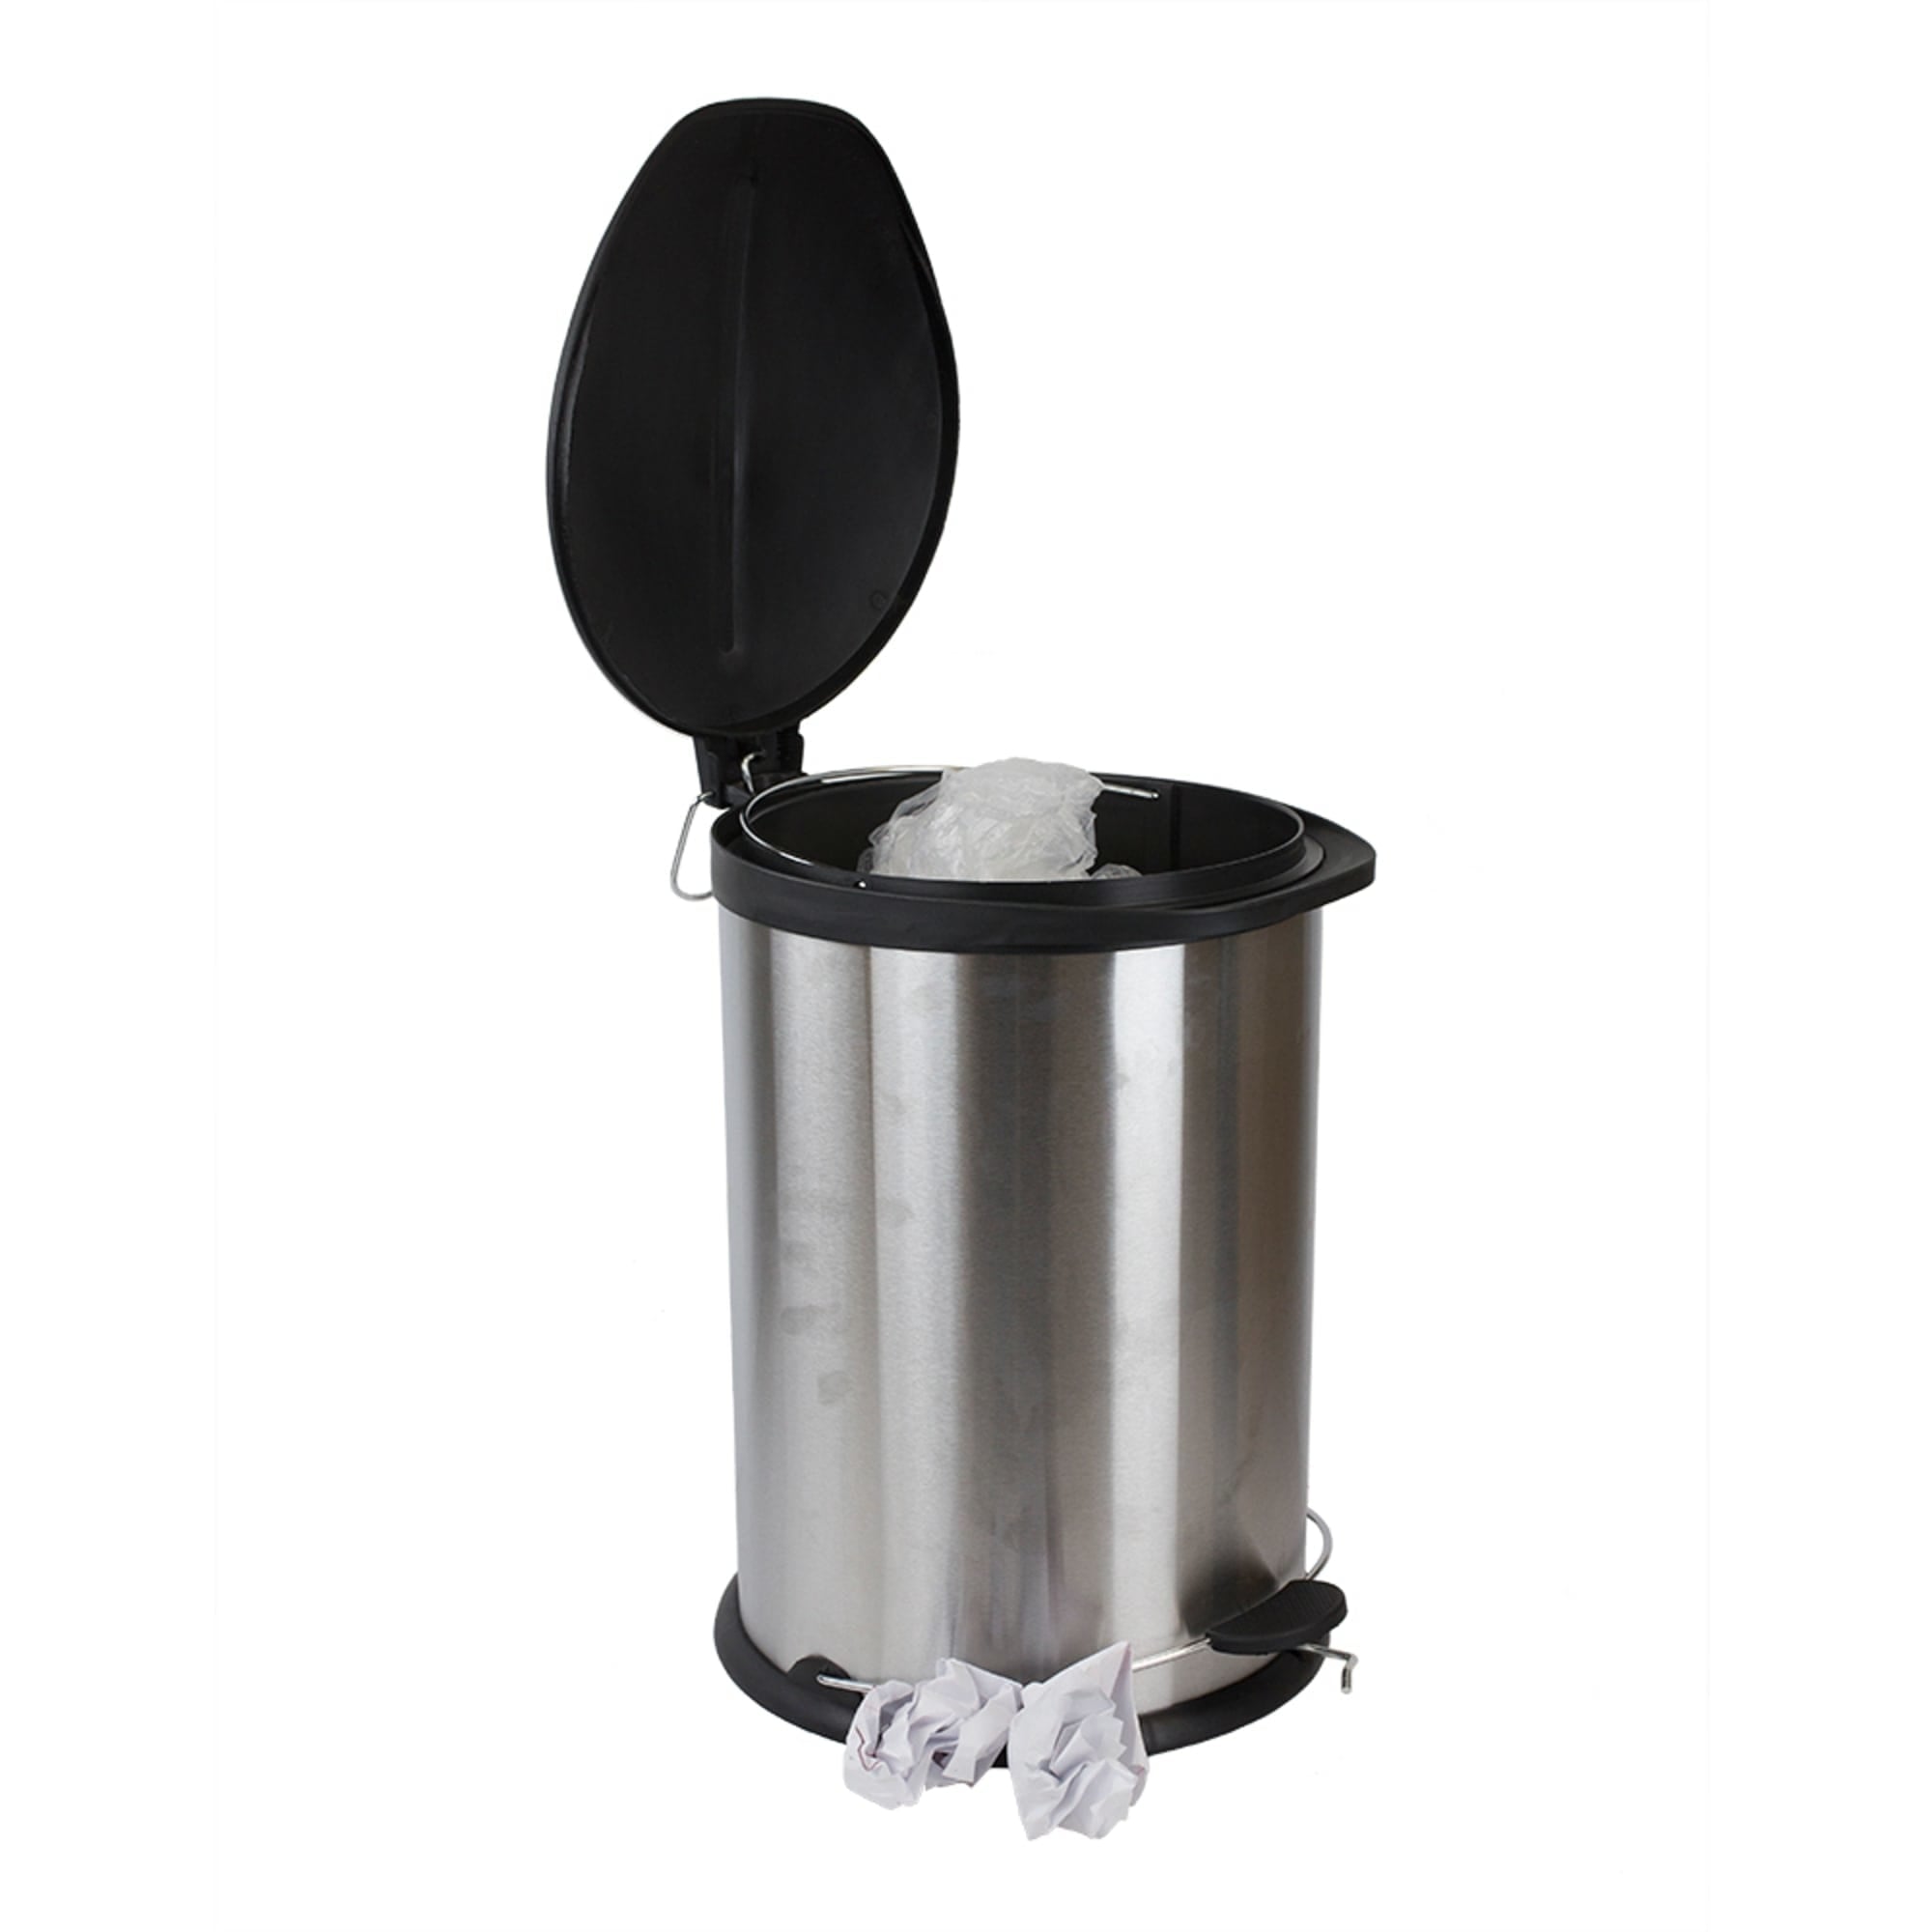 Home Basics 20 Liter Brushed Stainless Steel  with Plastic Top Waste Bin, Silver $30.00 EACH, CASE PACK OF 2